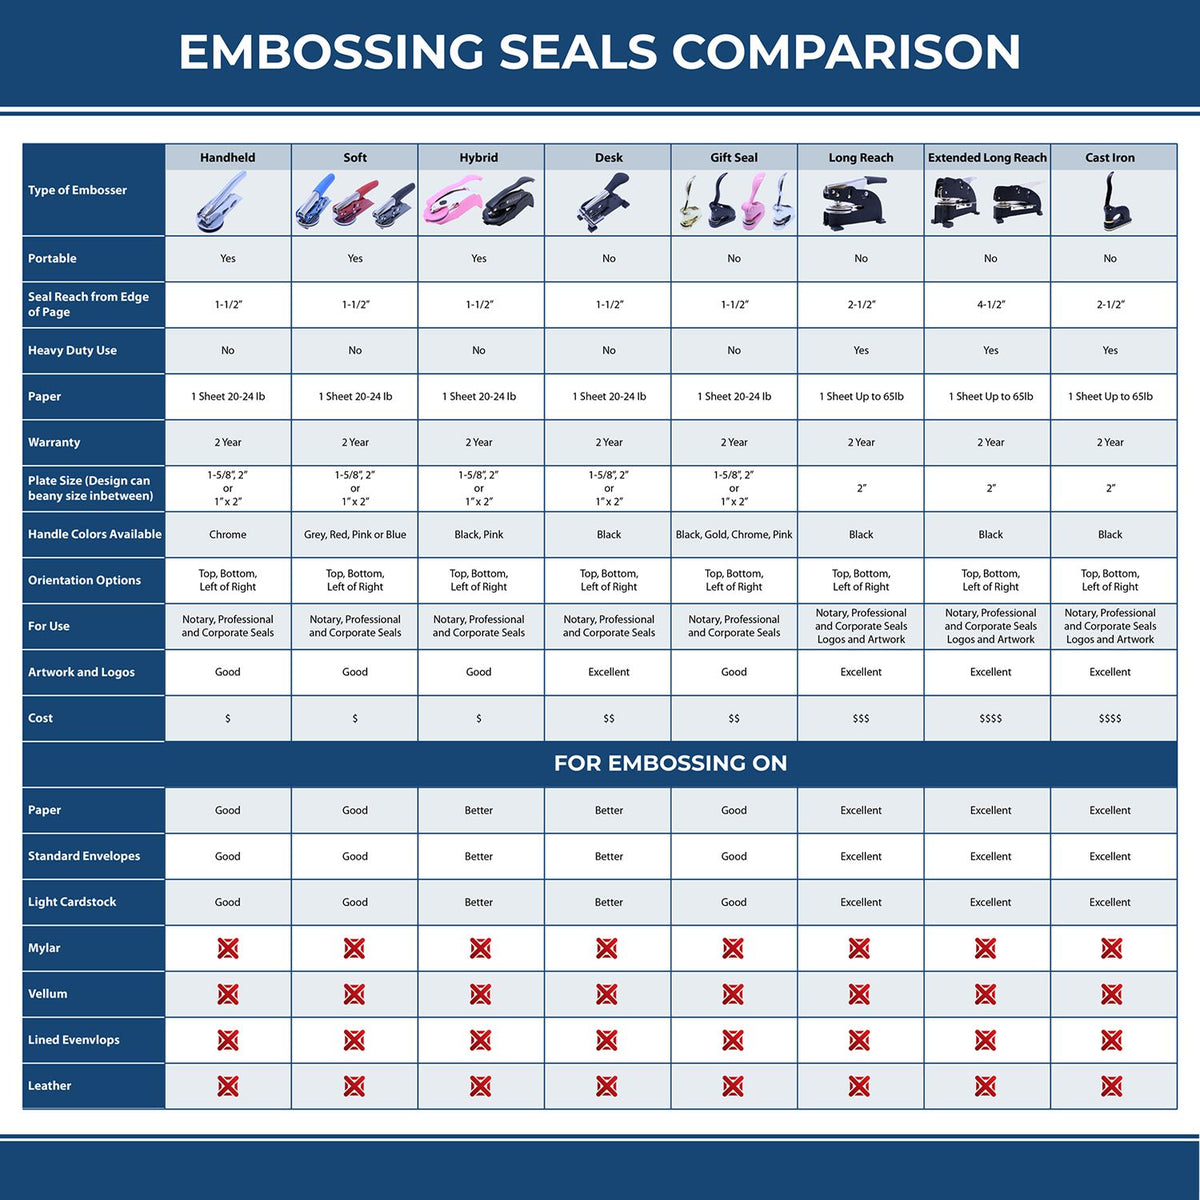 A comparison chart for the different types of mount models available for the Handheld Indiana Professional Engineer Embosser.